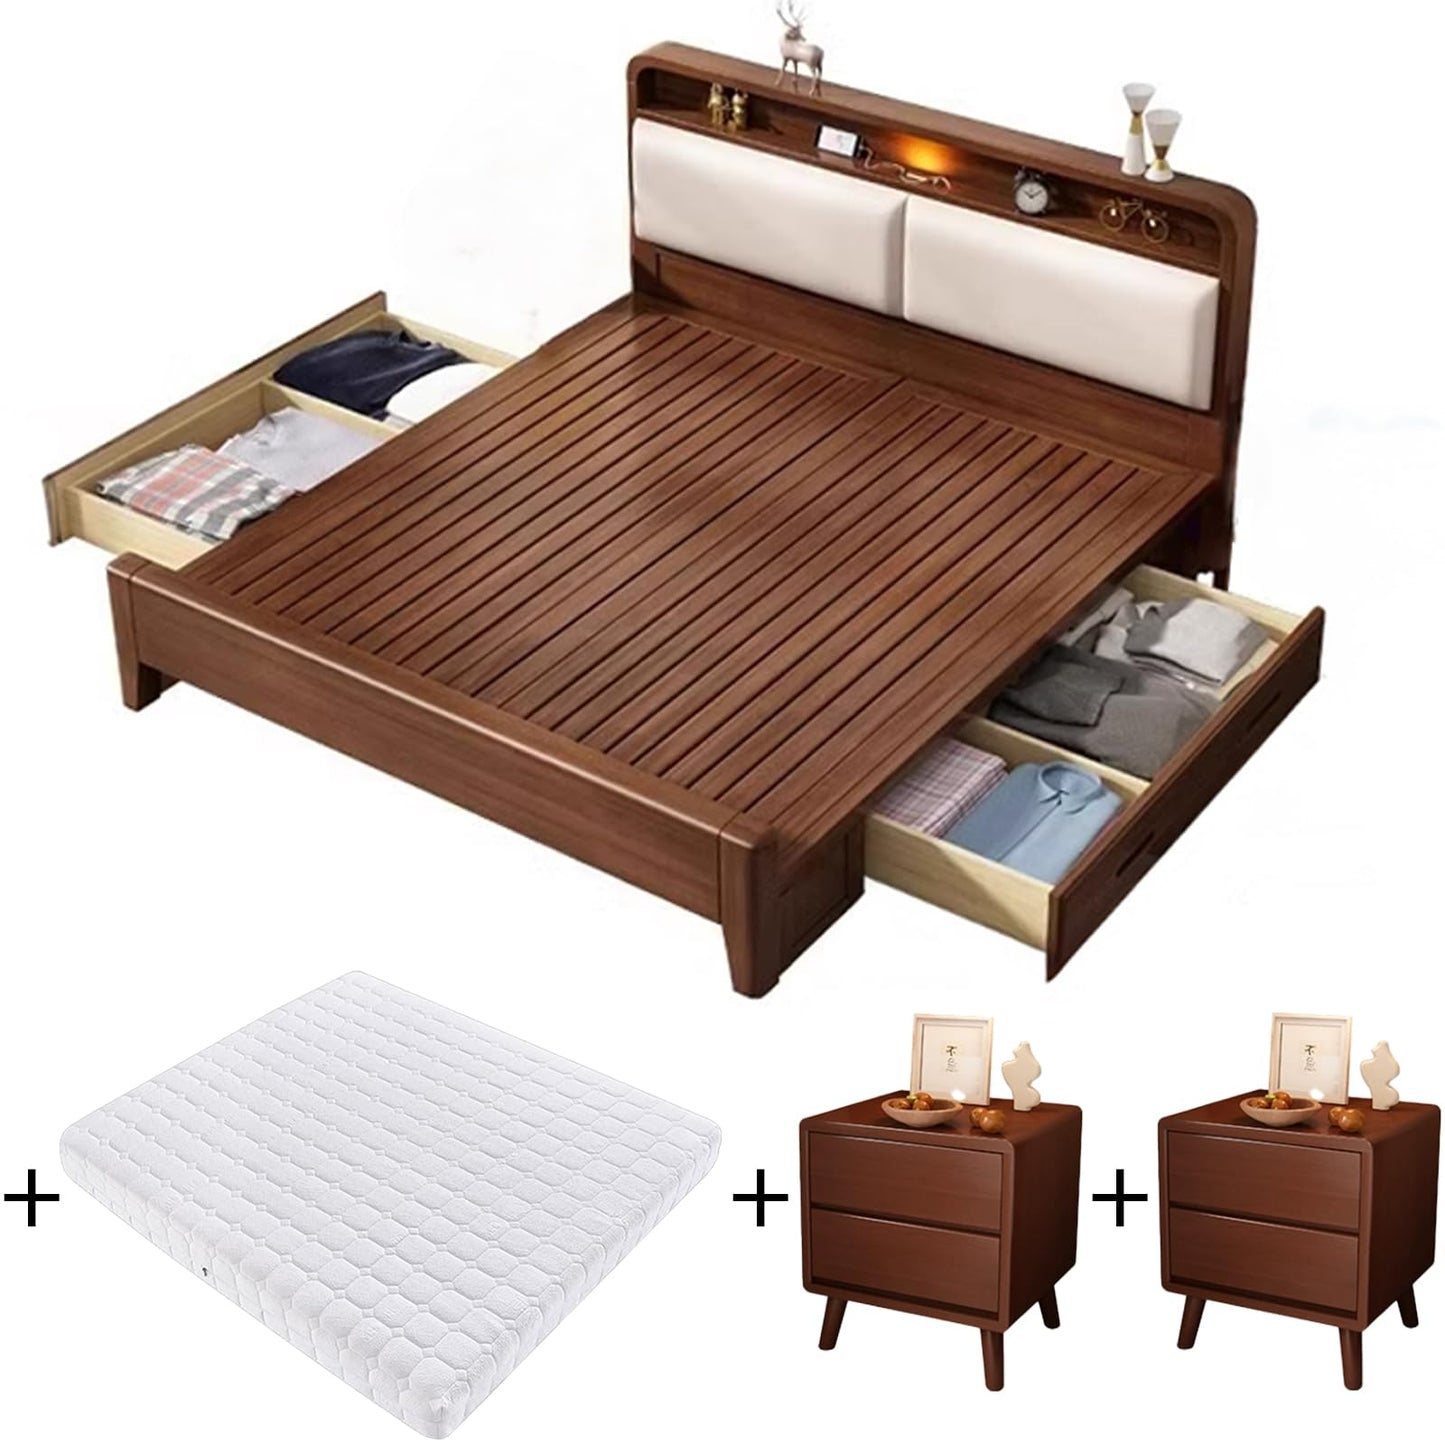 Solid Wood Bed Frame with Mattress and 2 Nightstand, Farmhouse Bedframe with Headboard, Storage, USB Port and Night Light (Walnut Pull-Out Storage